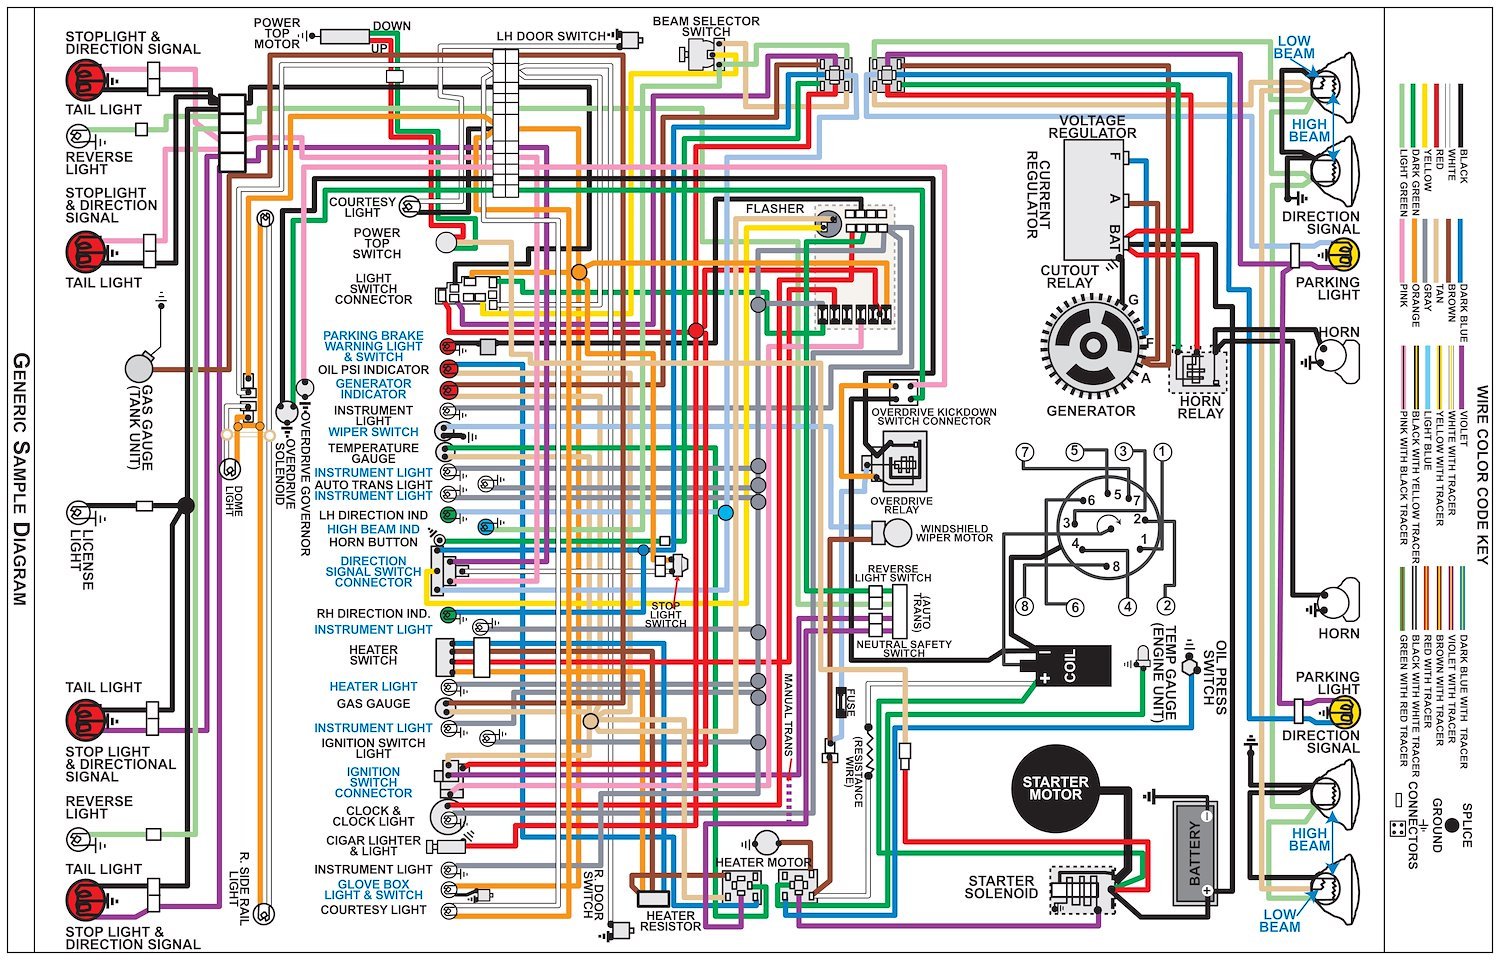 Wiring Diagram for 1951 Chevy Car, 11 in.